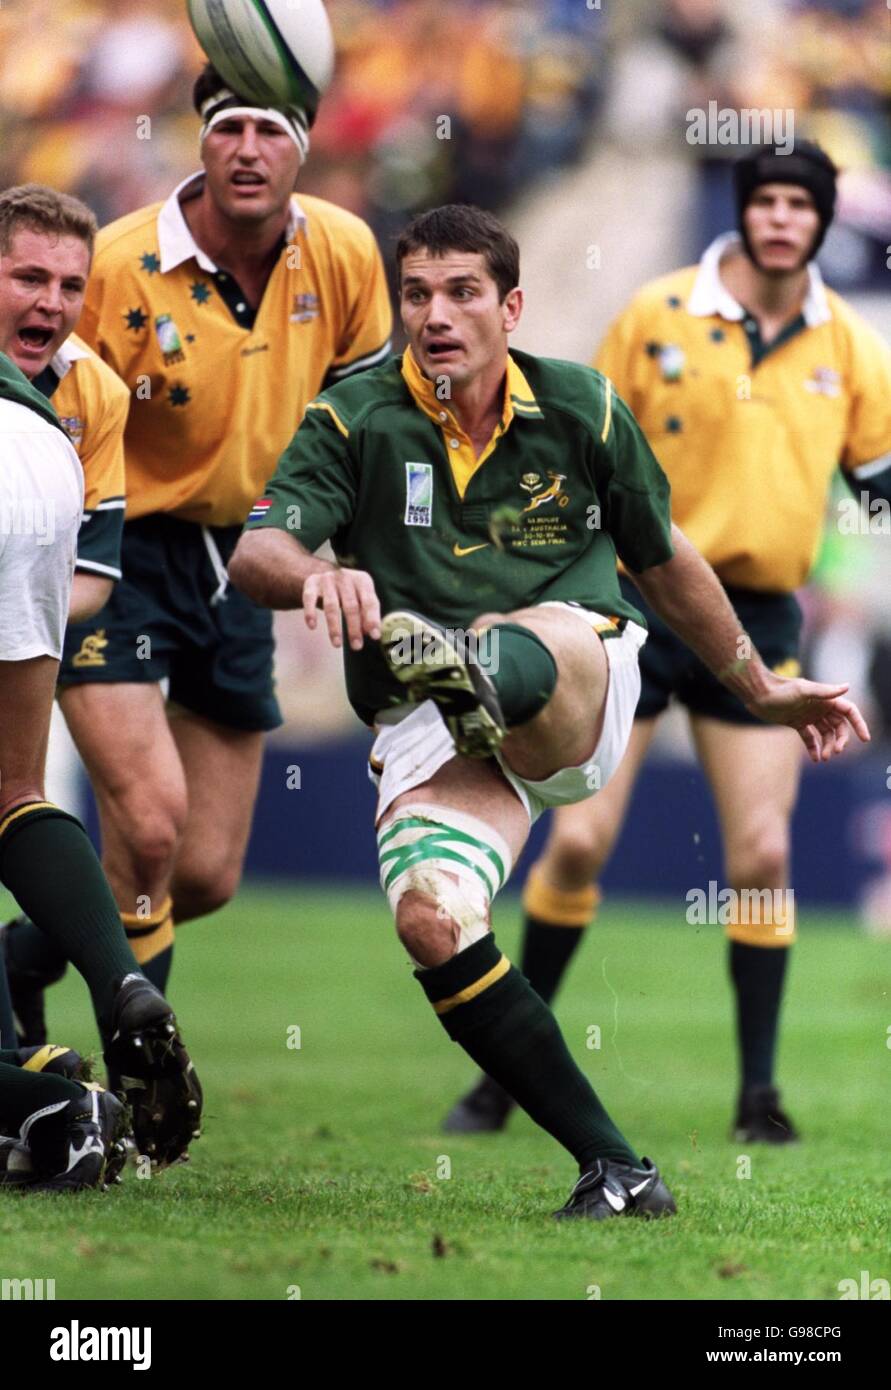 Rugby Union - Rugby World Cup 99 - Semi Final - South Africa v Australia